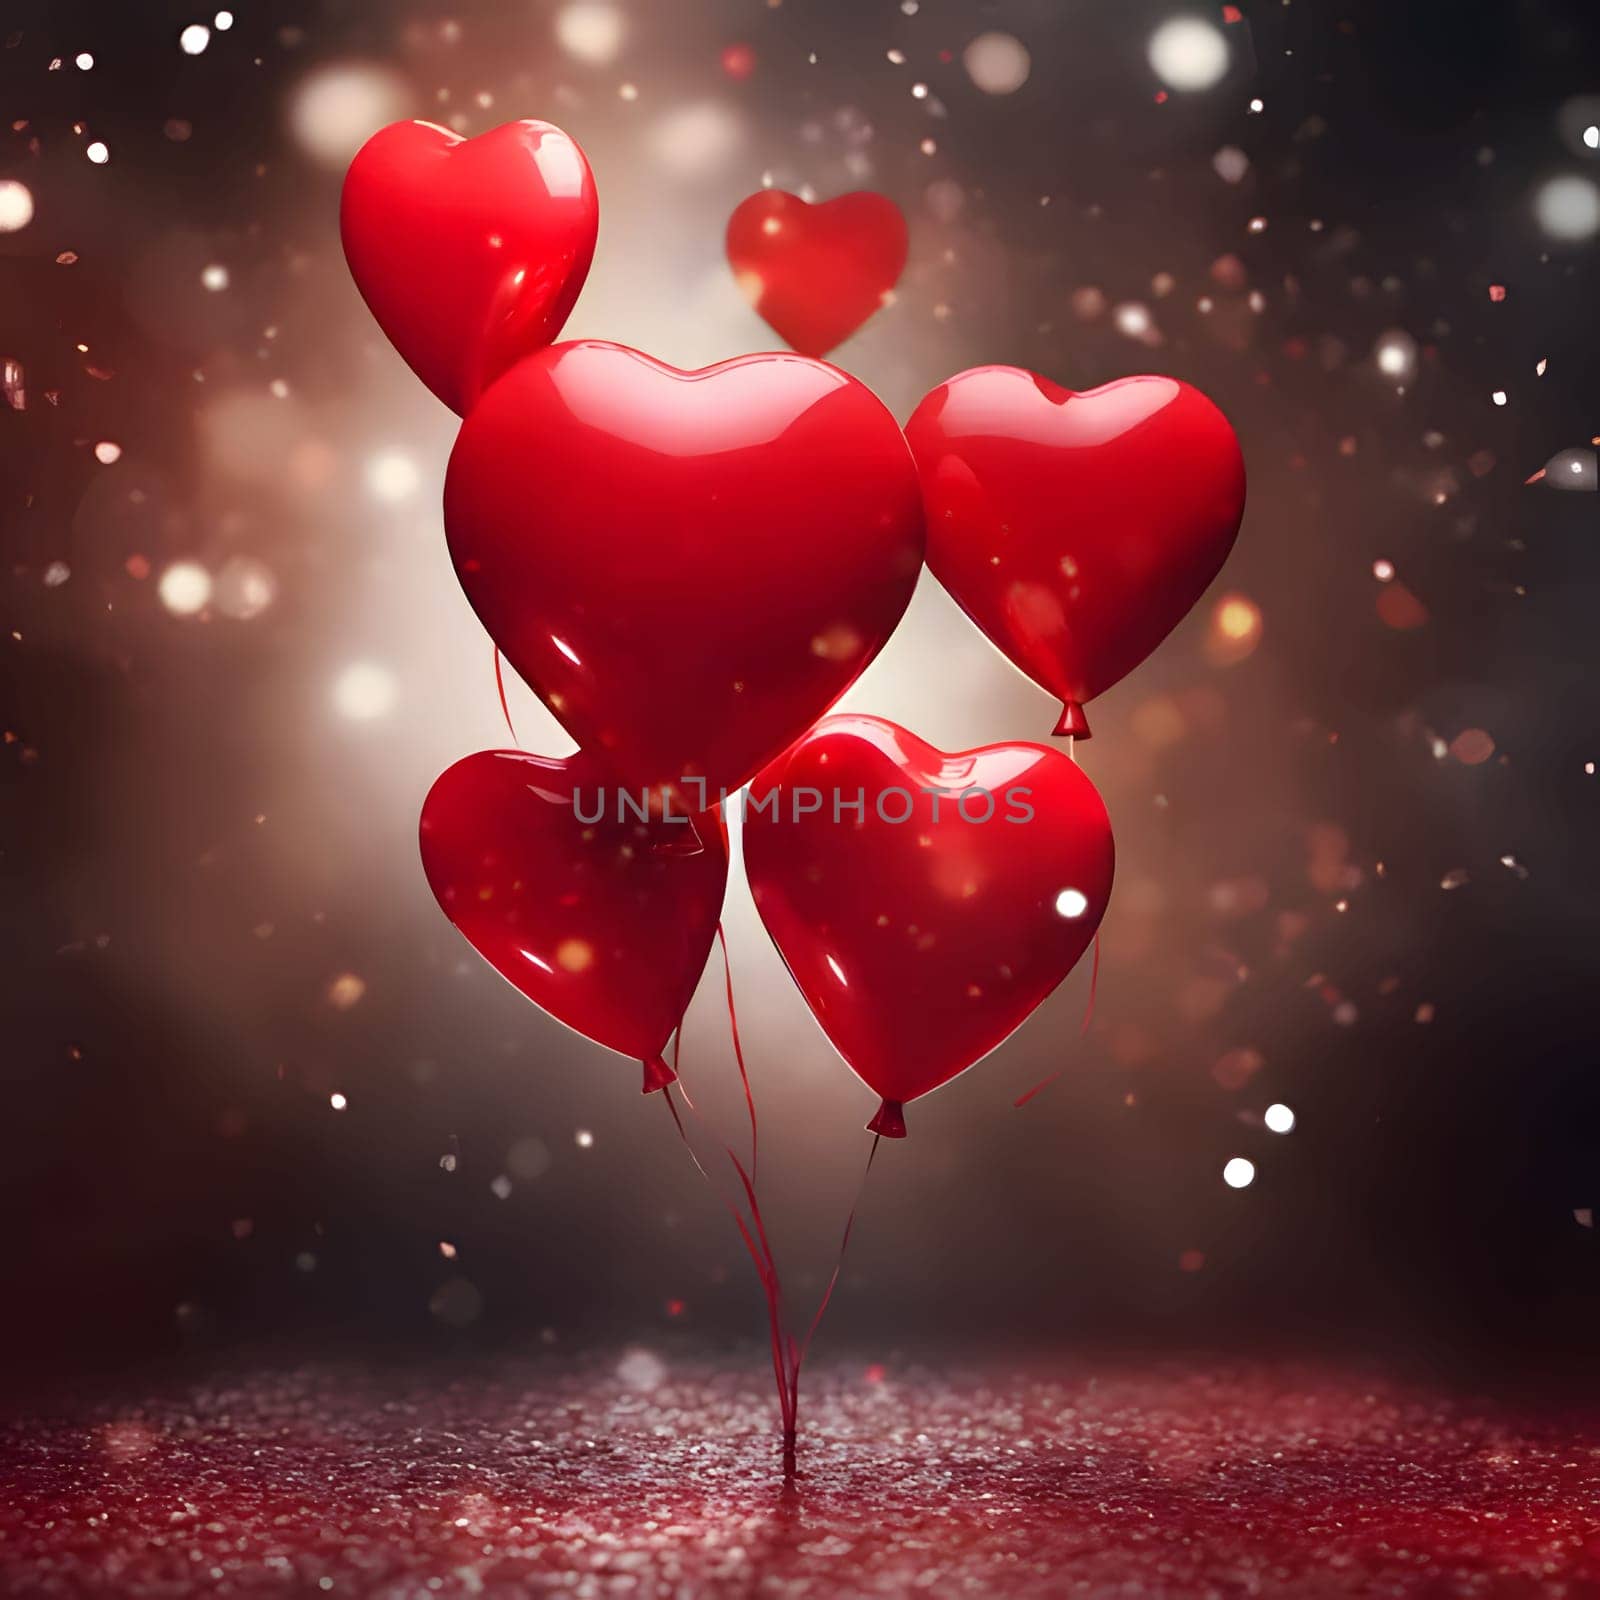 Red heart-shaped balloons and confetti on a dark background, space for your own content. Banner. New Year's party and celebrations. A time of celebration and resolutions.